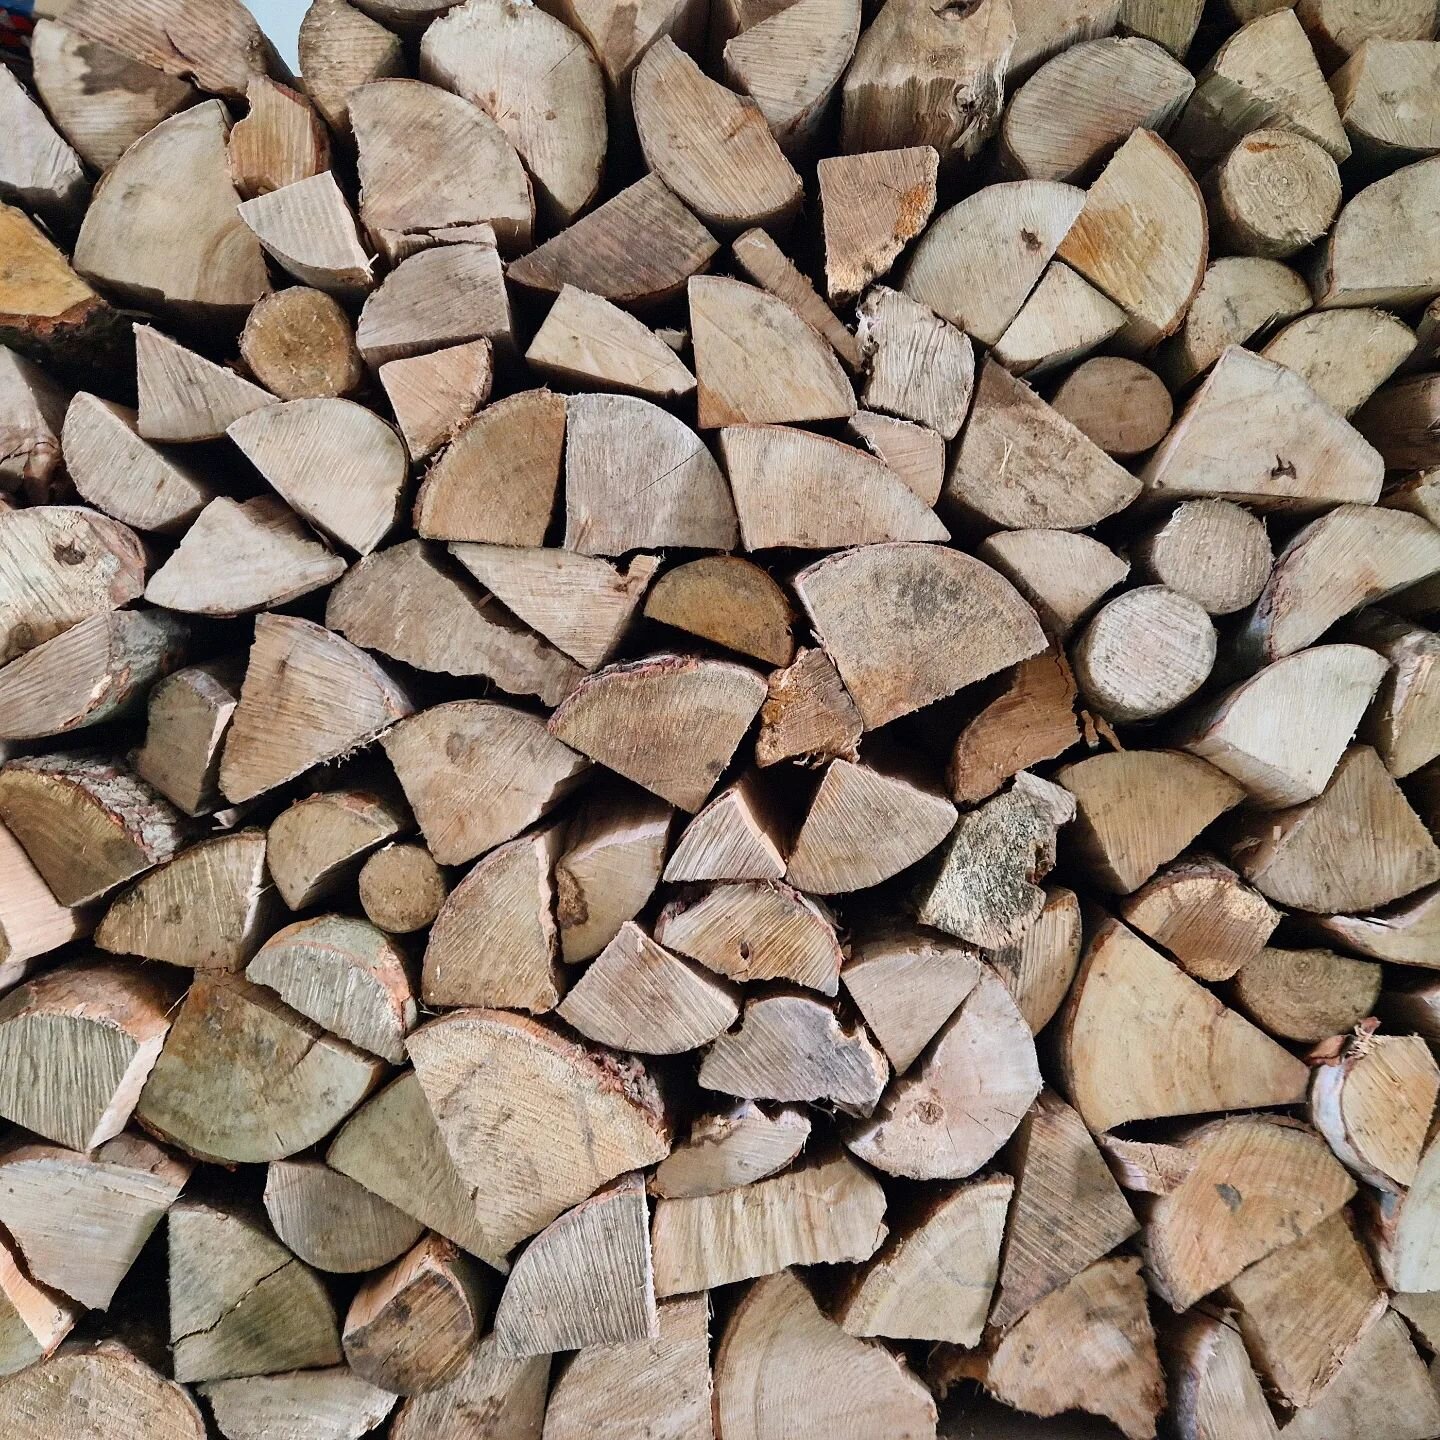 A fresh stack of hardwood, ready for our festive guests. You can't beat a cosy stove!